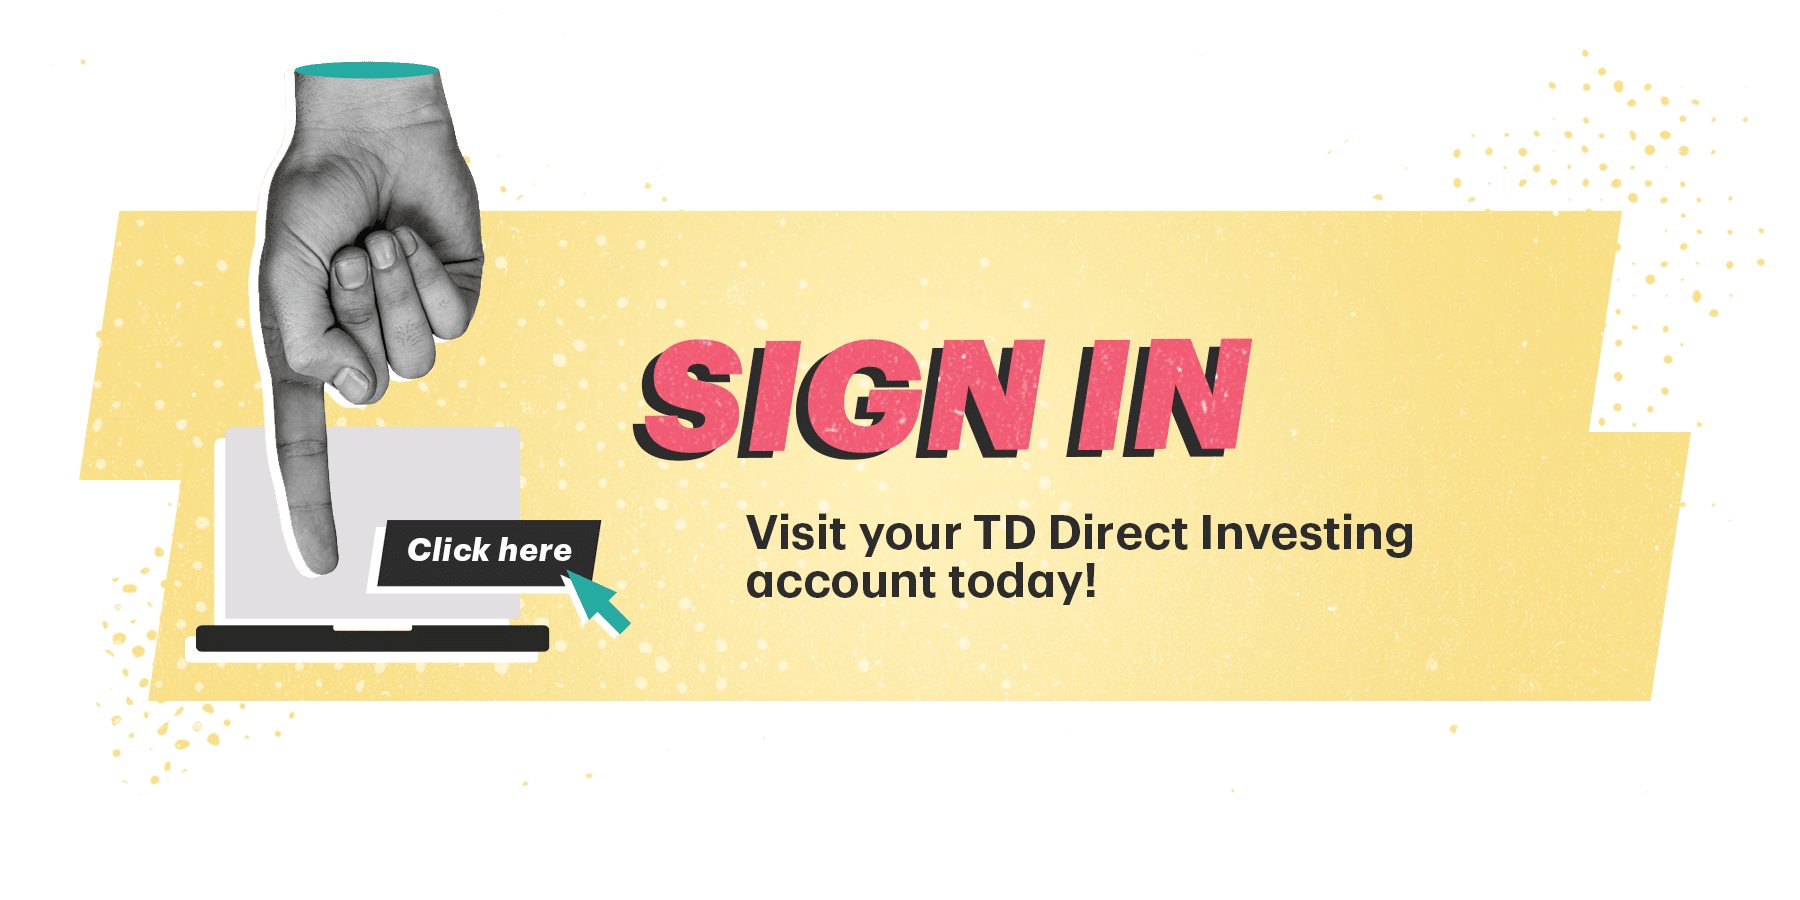 Sign In. Visit your TD Direct Investing account today!